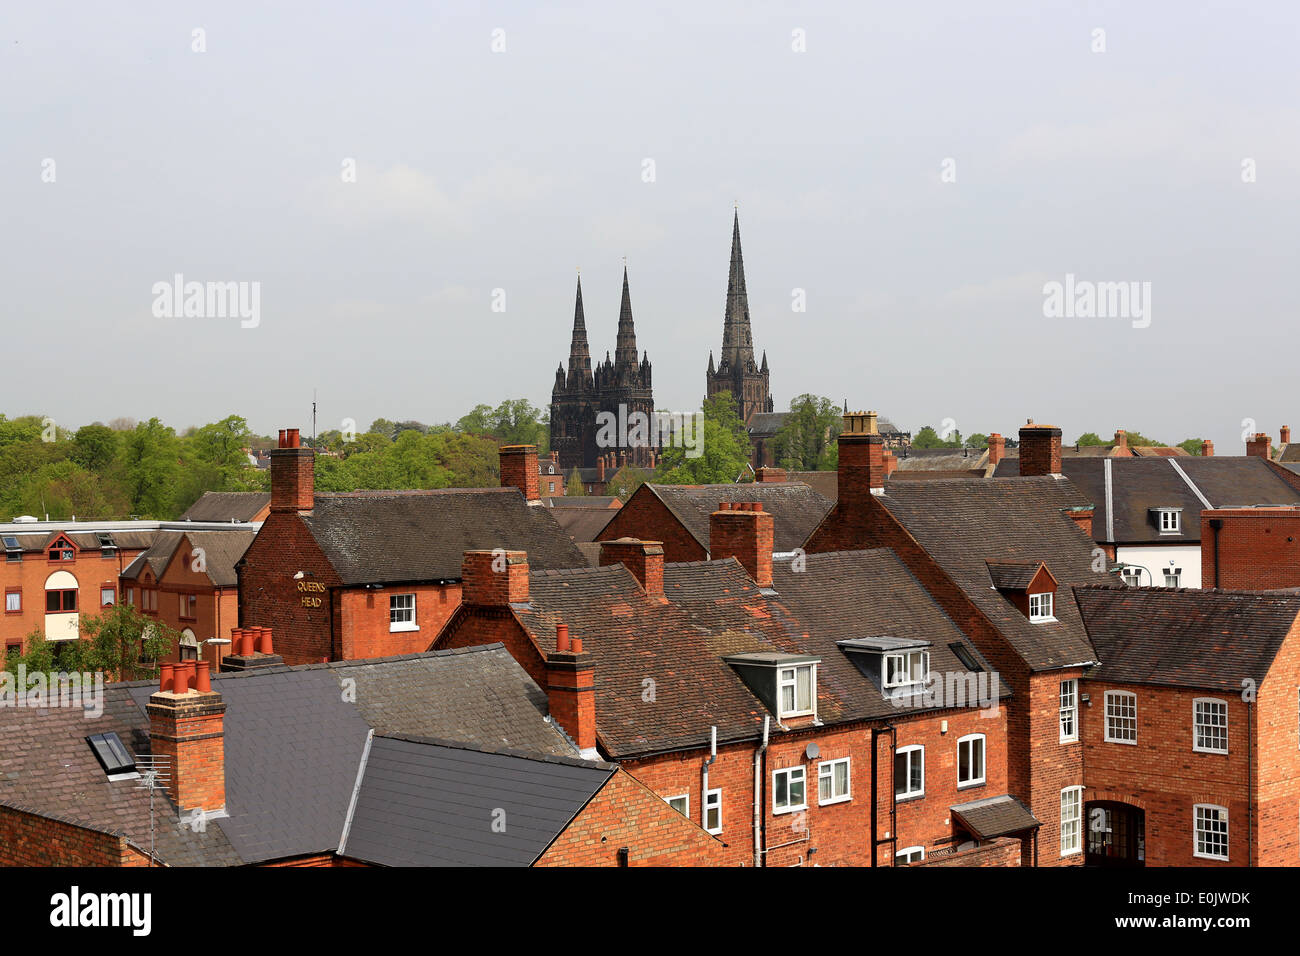 Lichfield Cathedral in Lichfield City Centre, Staffordshire, showing the roofs of the older buildings and the three spires Stock Photo